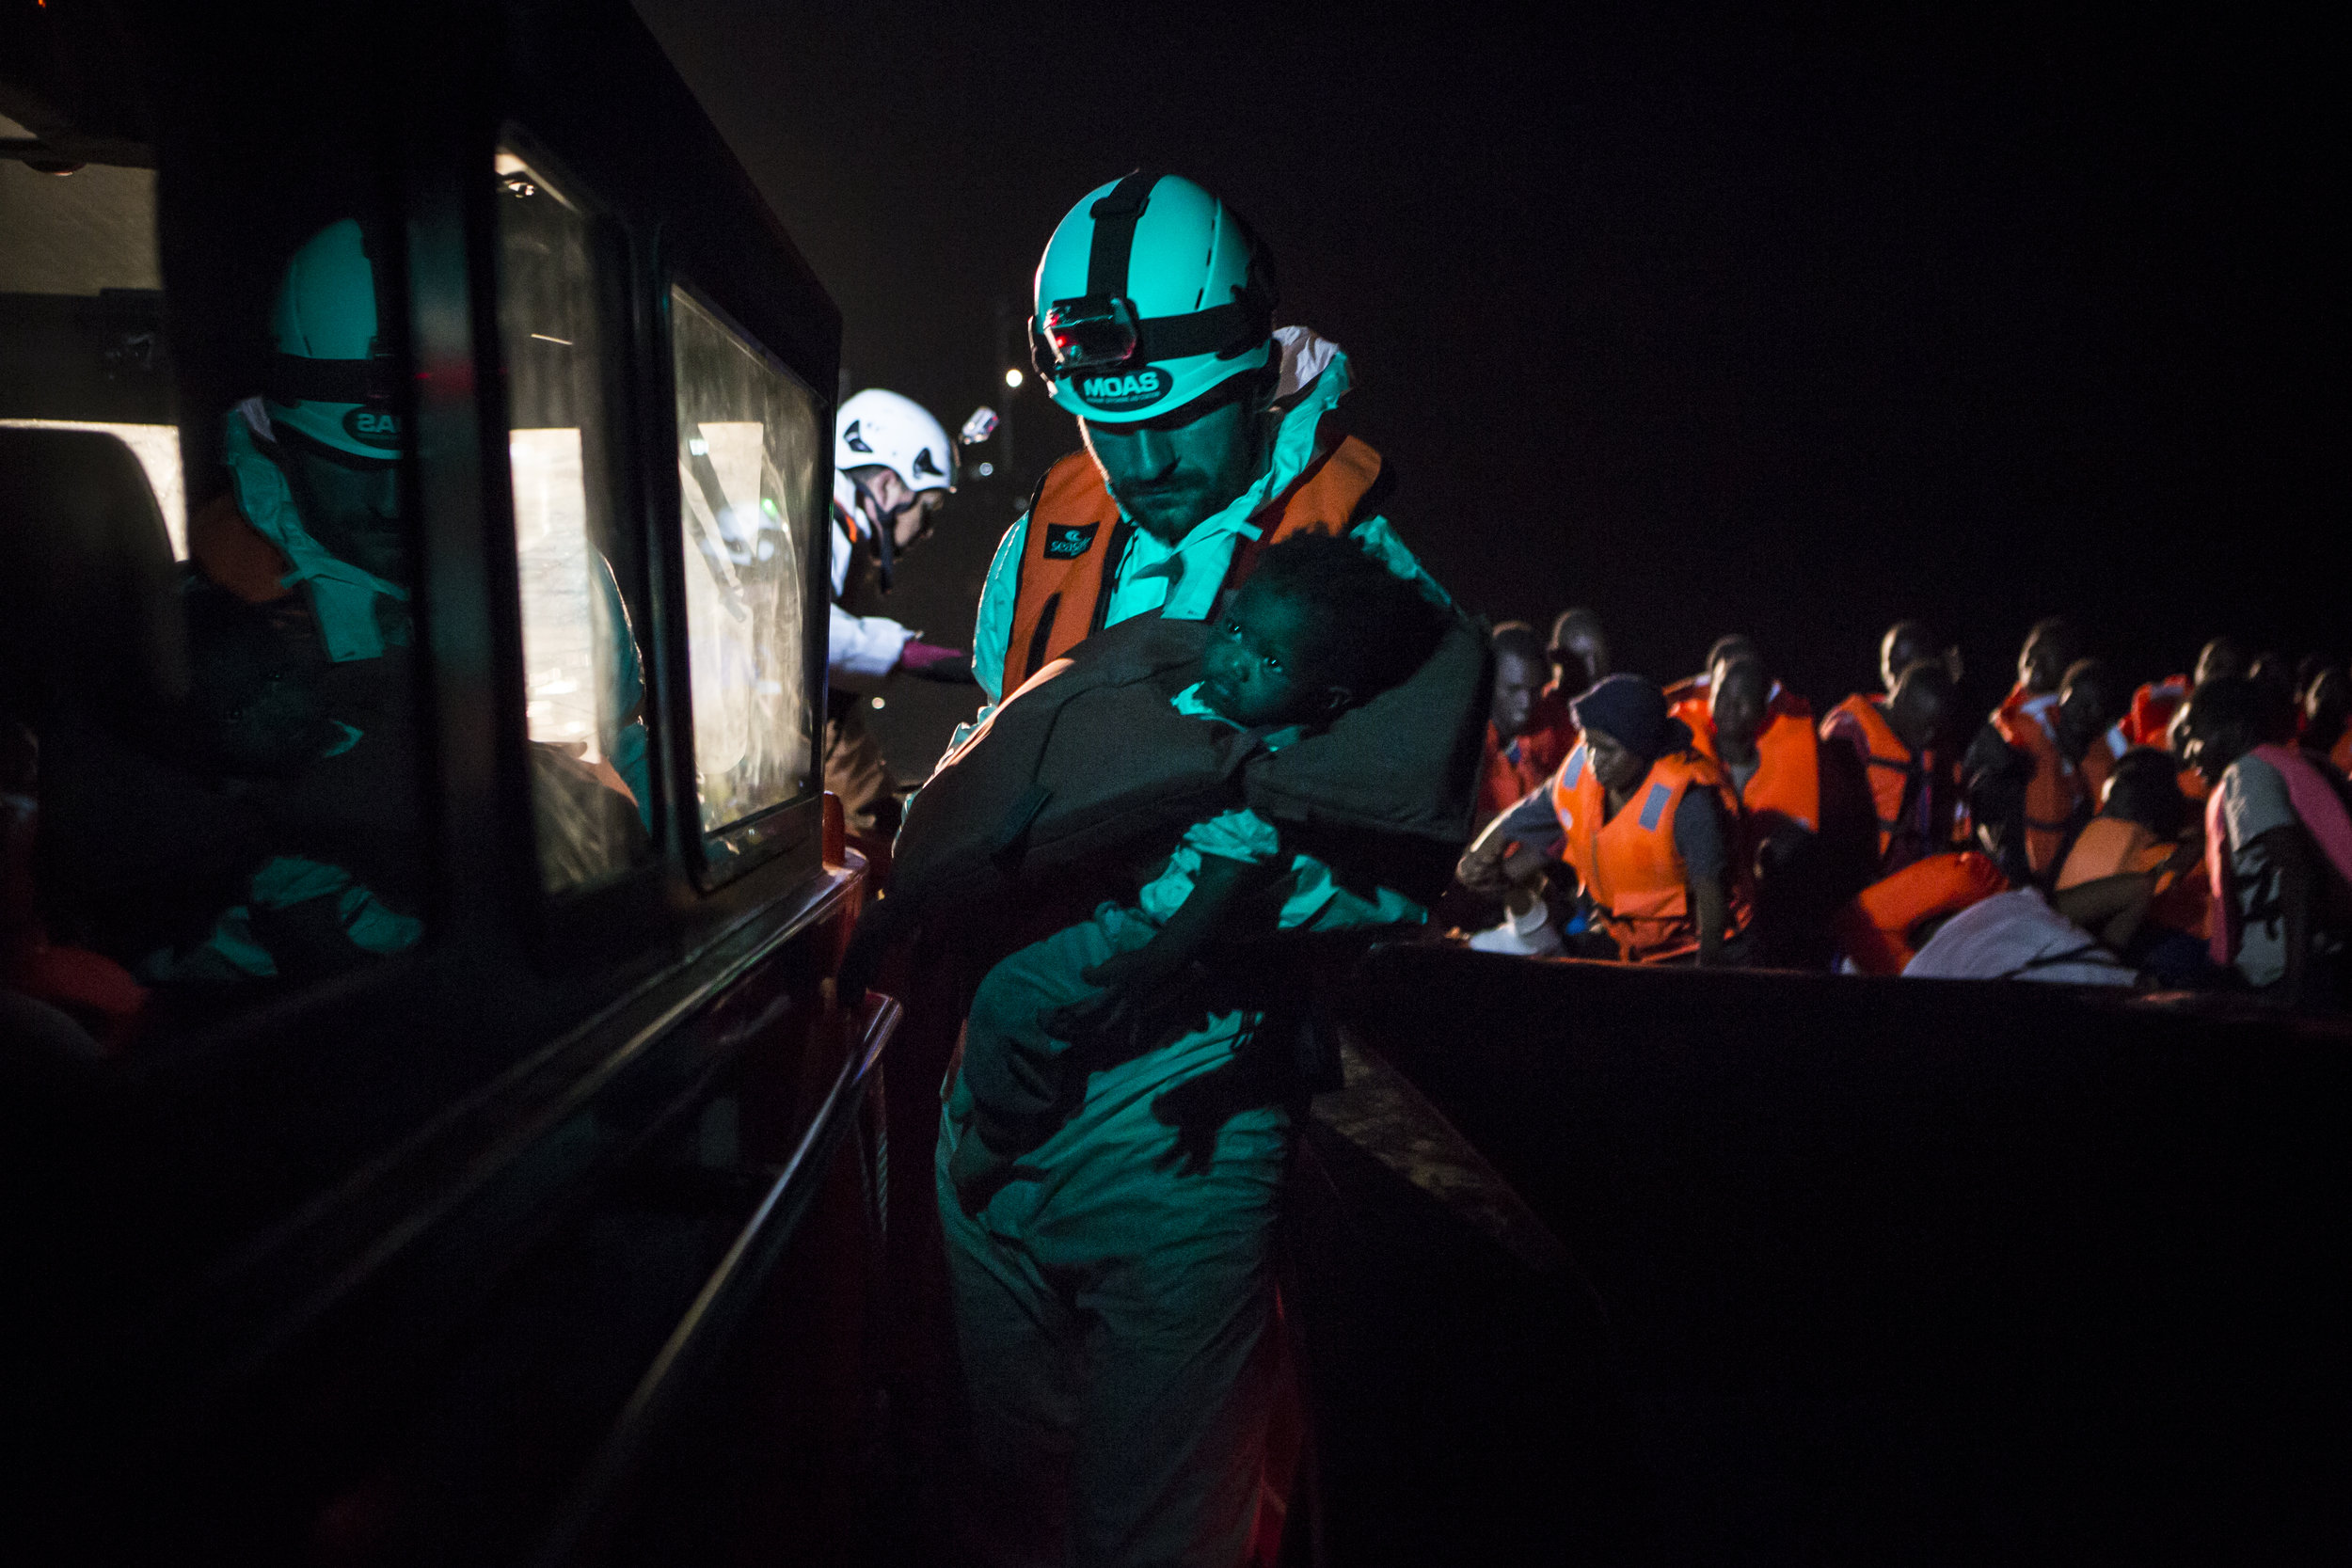  A MOAS rescue team member carries a baby from the rubber boat in the background to the safety of the rescue vessel. � Mathieu Willcocks/MOAS.eu 2016, all rights reserved. 